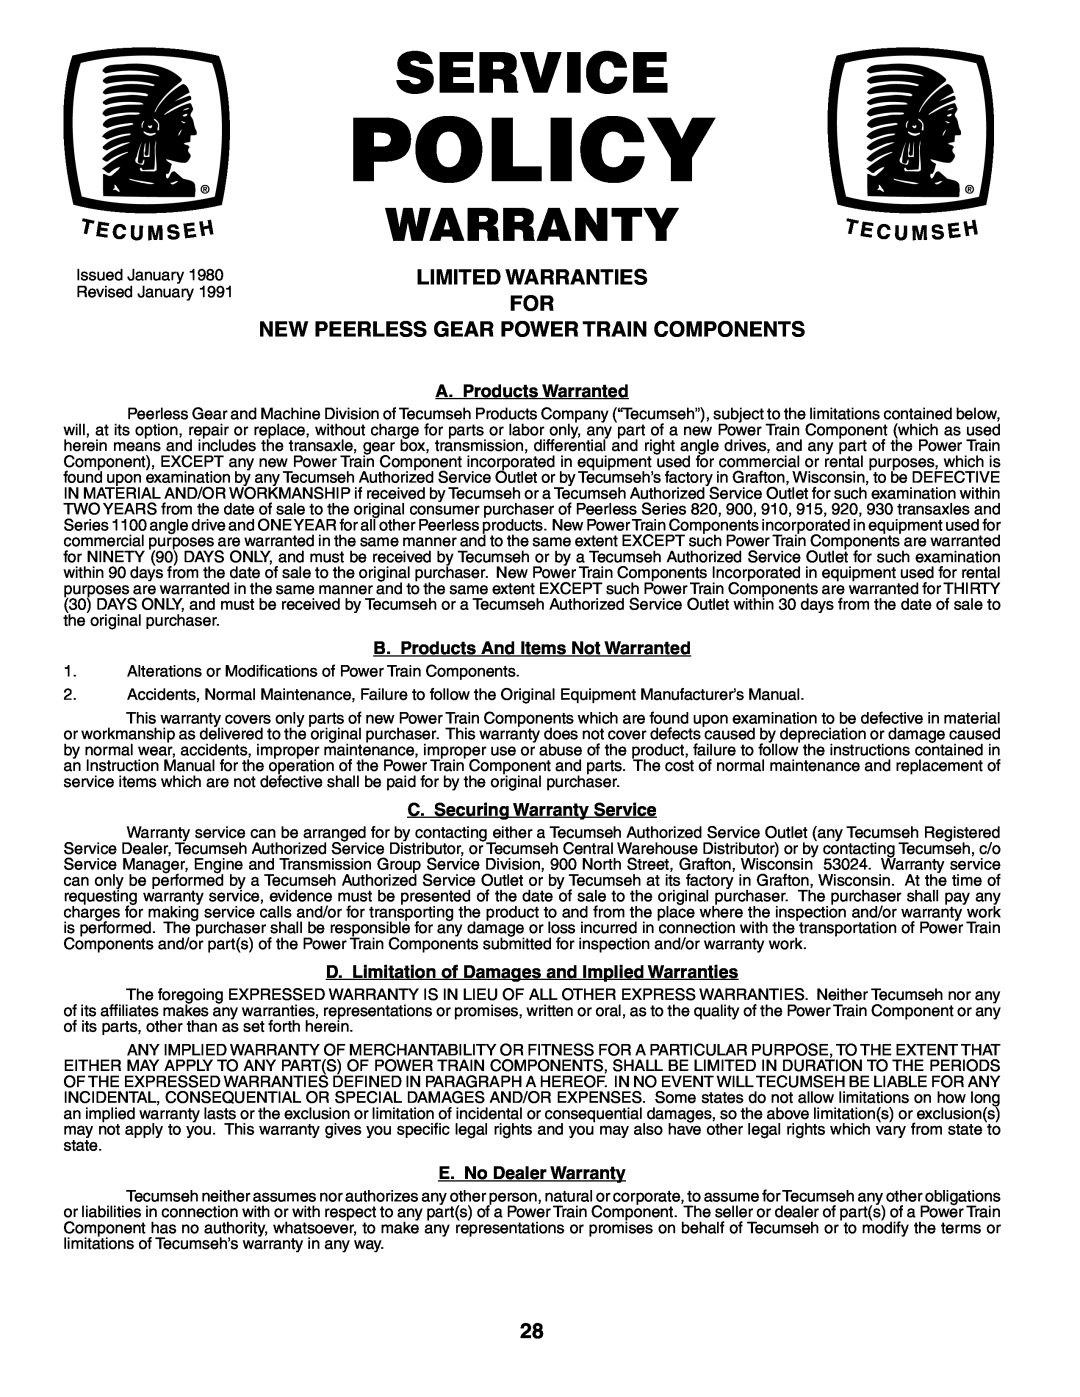 Weed Eater HD13538 manual Limited Warranties For, New Peerless Gear Power Train Components, Policy, Service, Warranty 